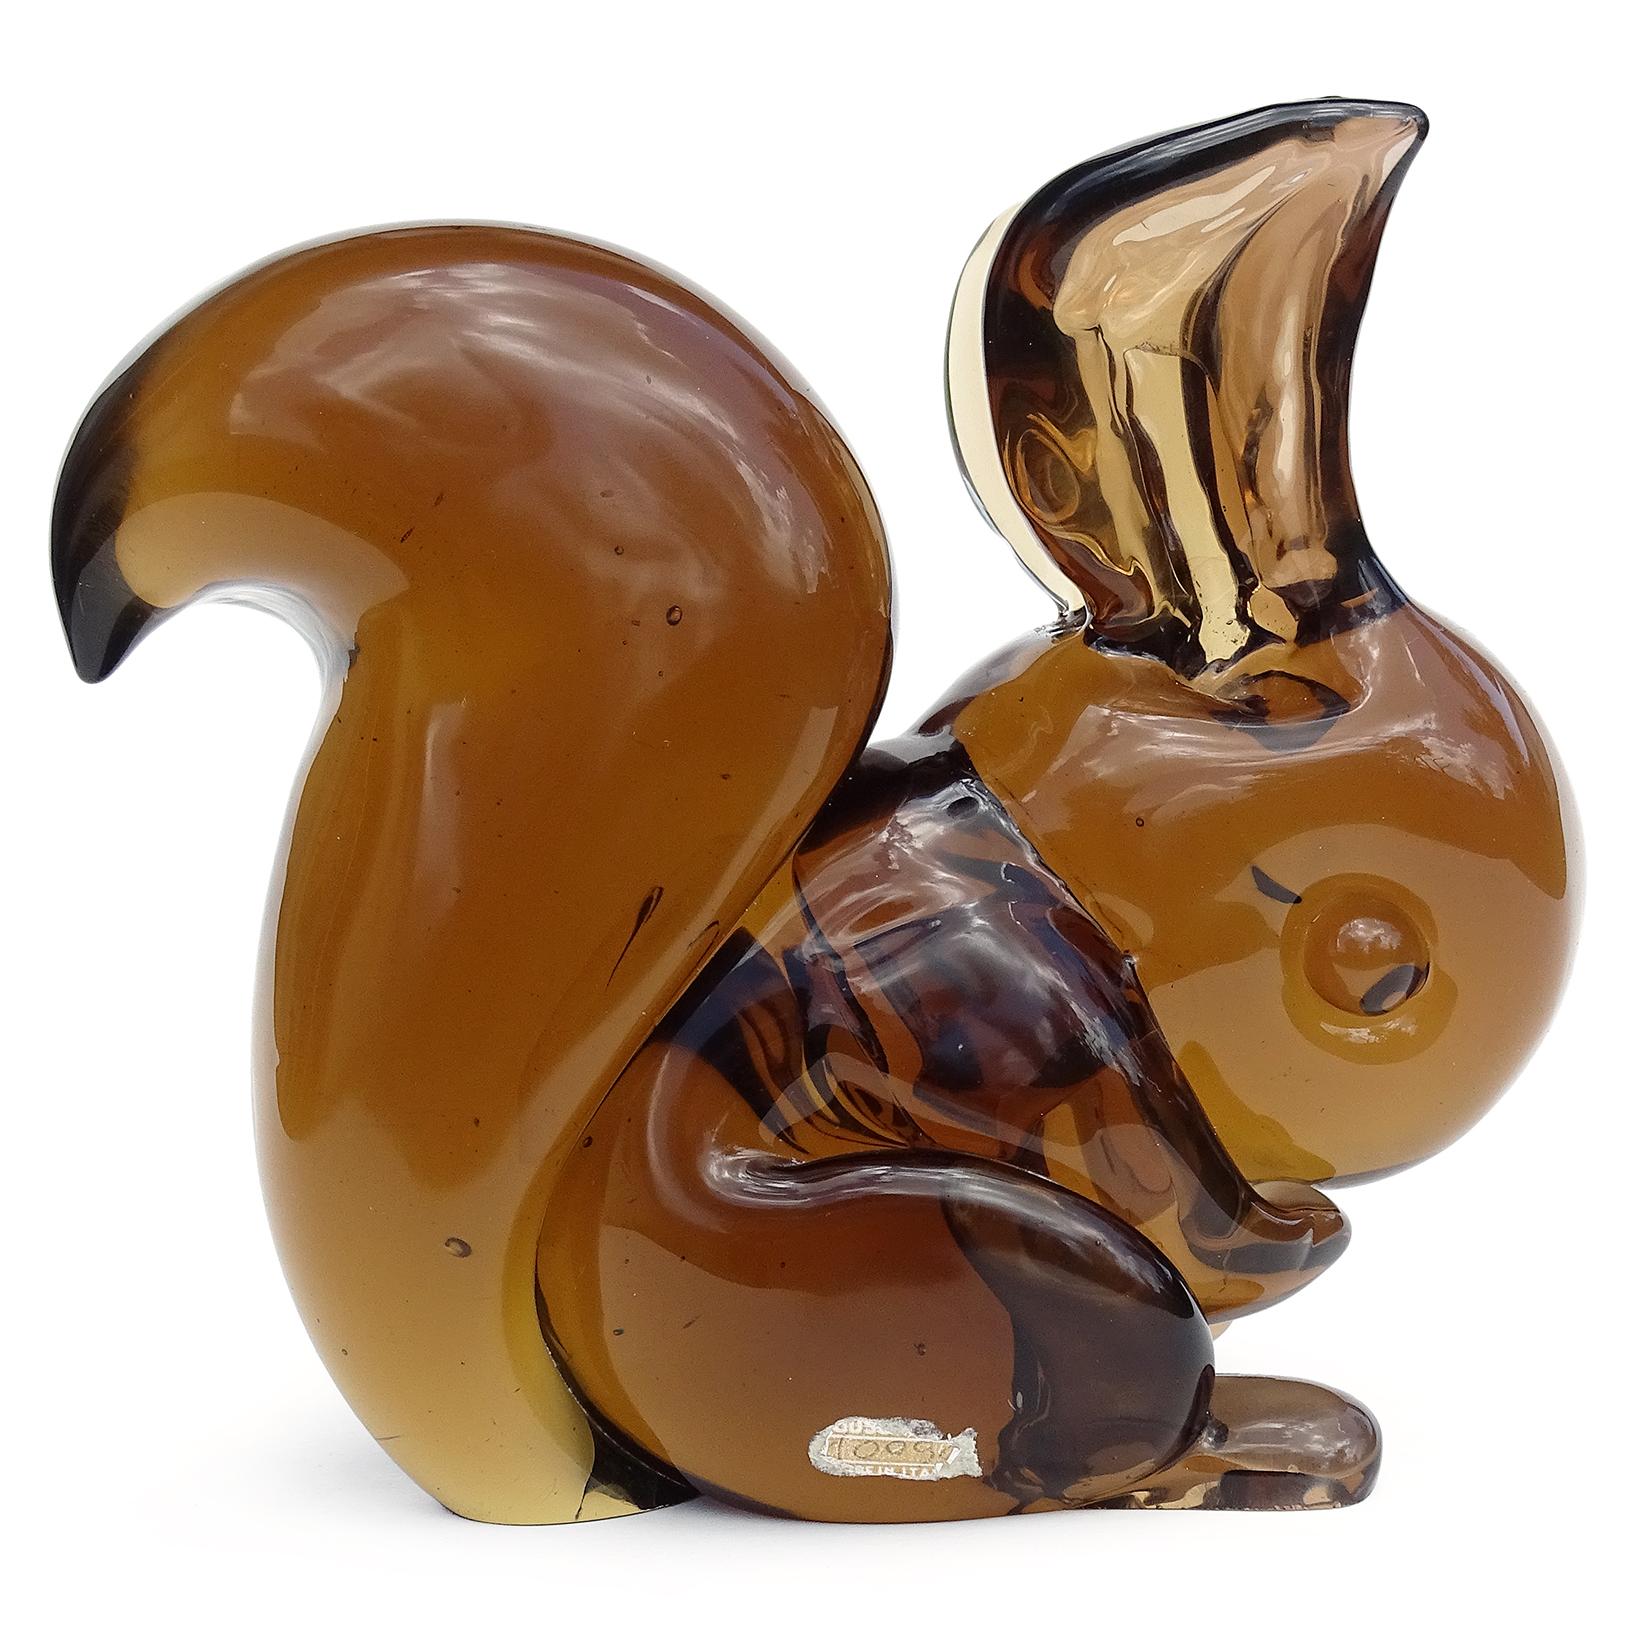 Beautiful, rare, and cute vintage Murano hand blown Sommerso amber brown Italian art glass squirrel figure / sculpture. Documented to designer Flavio Poli for the Seguso Vetri d'Arte company, circa 1950s. Published design in any books and the